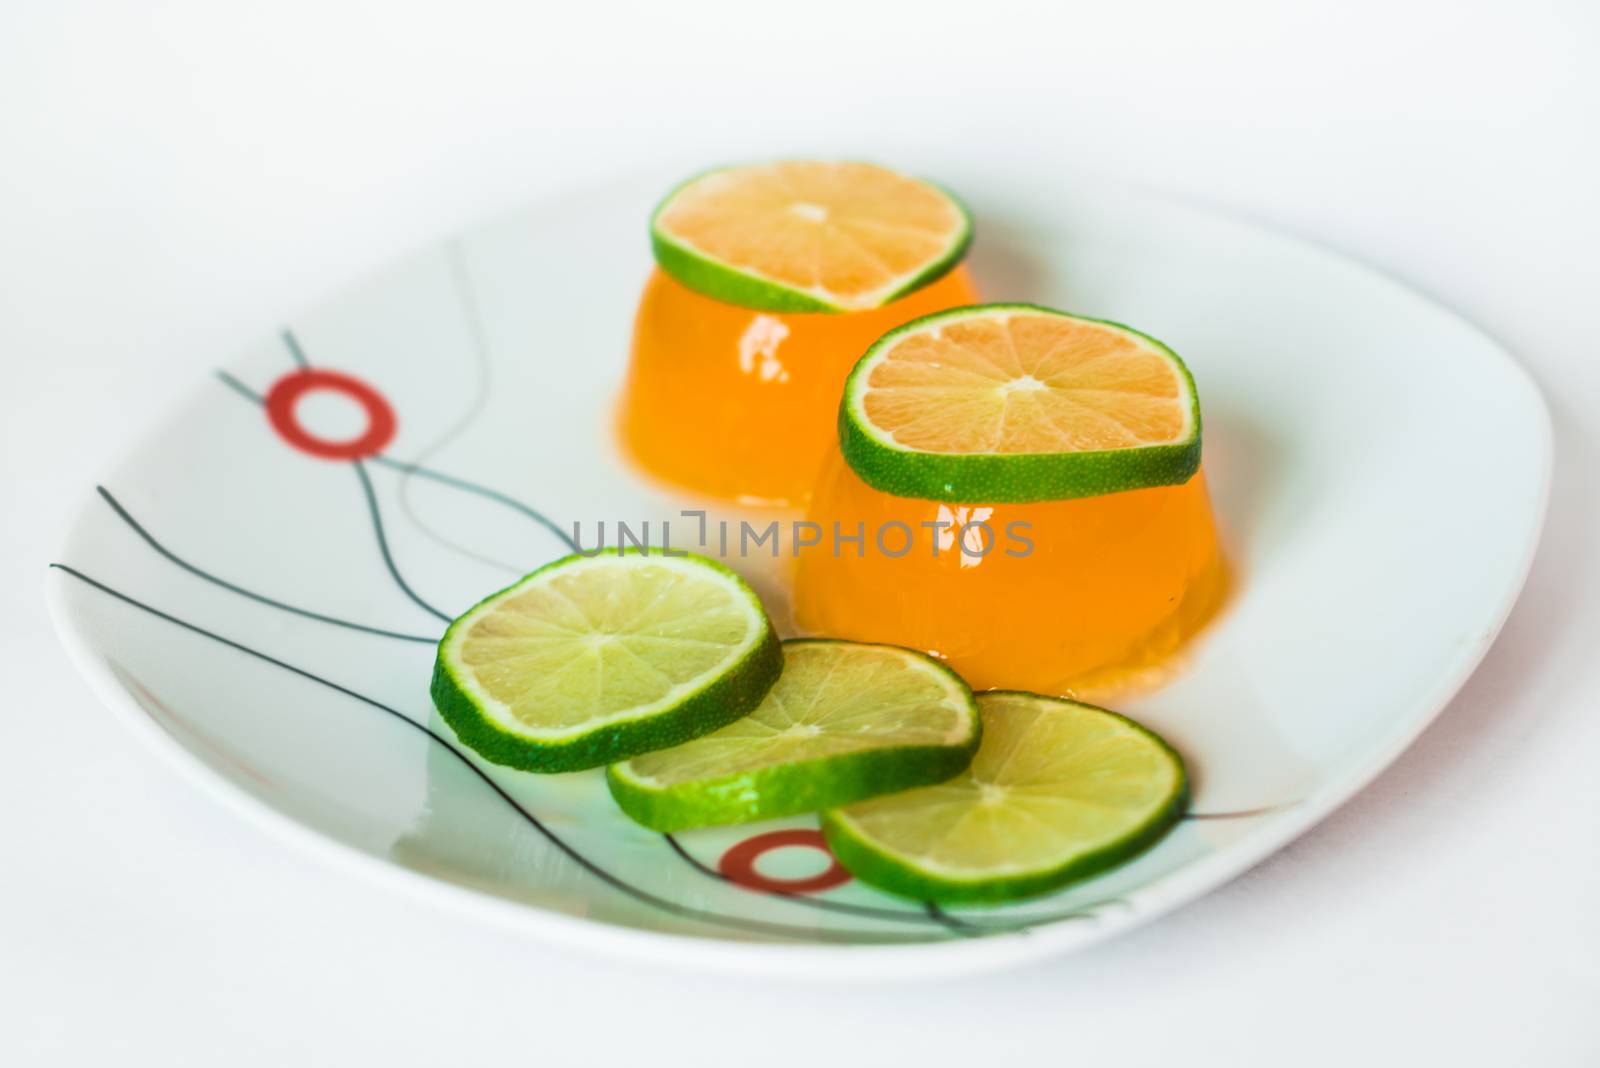 Orange jelly with slices of lime in a white plate on a white background